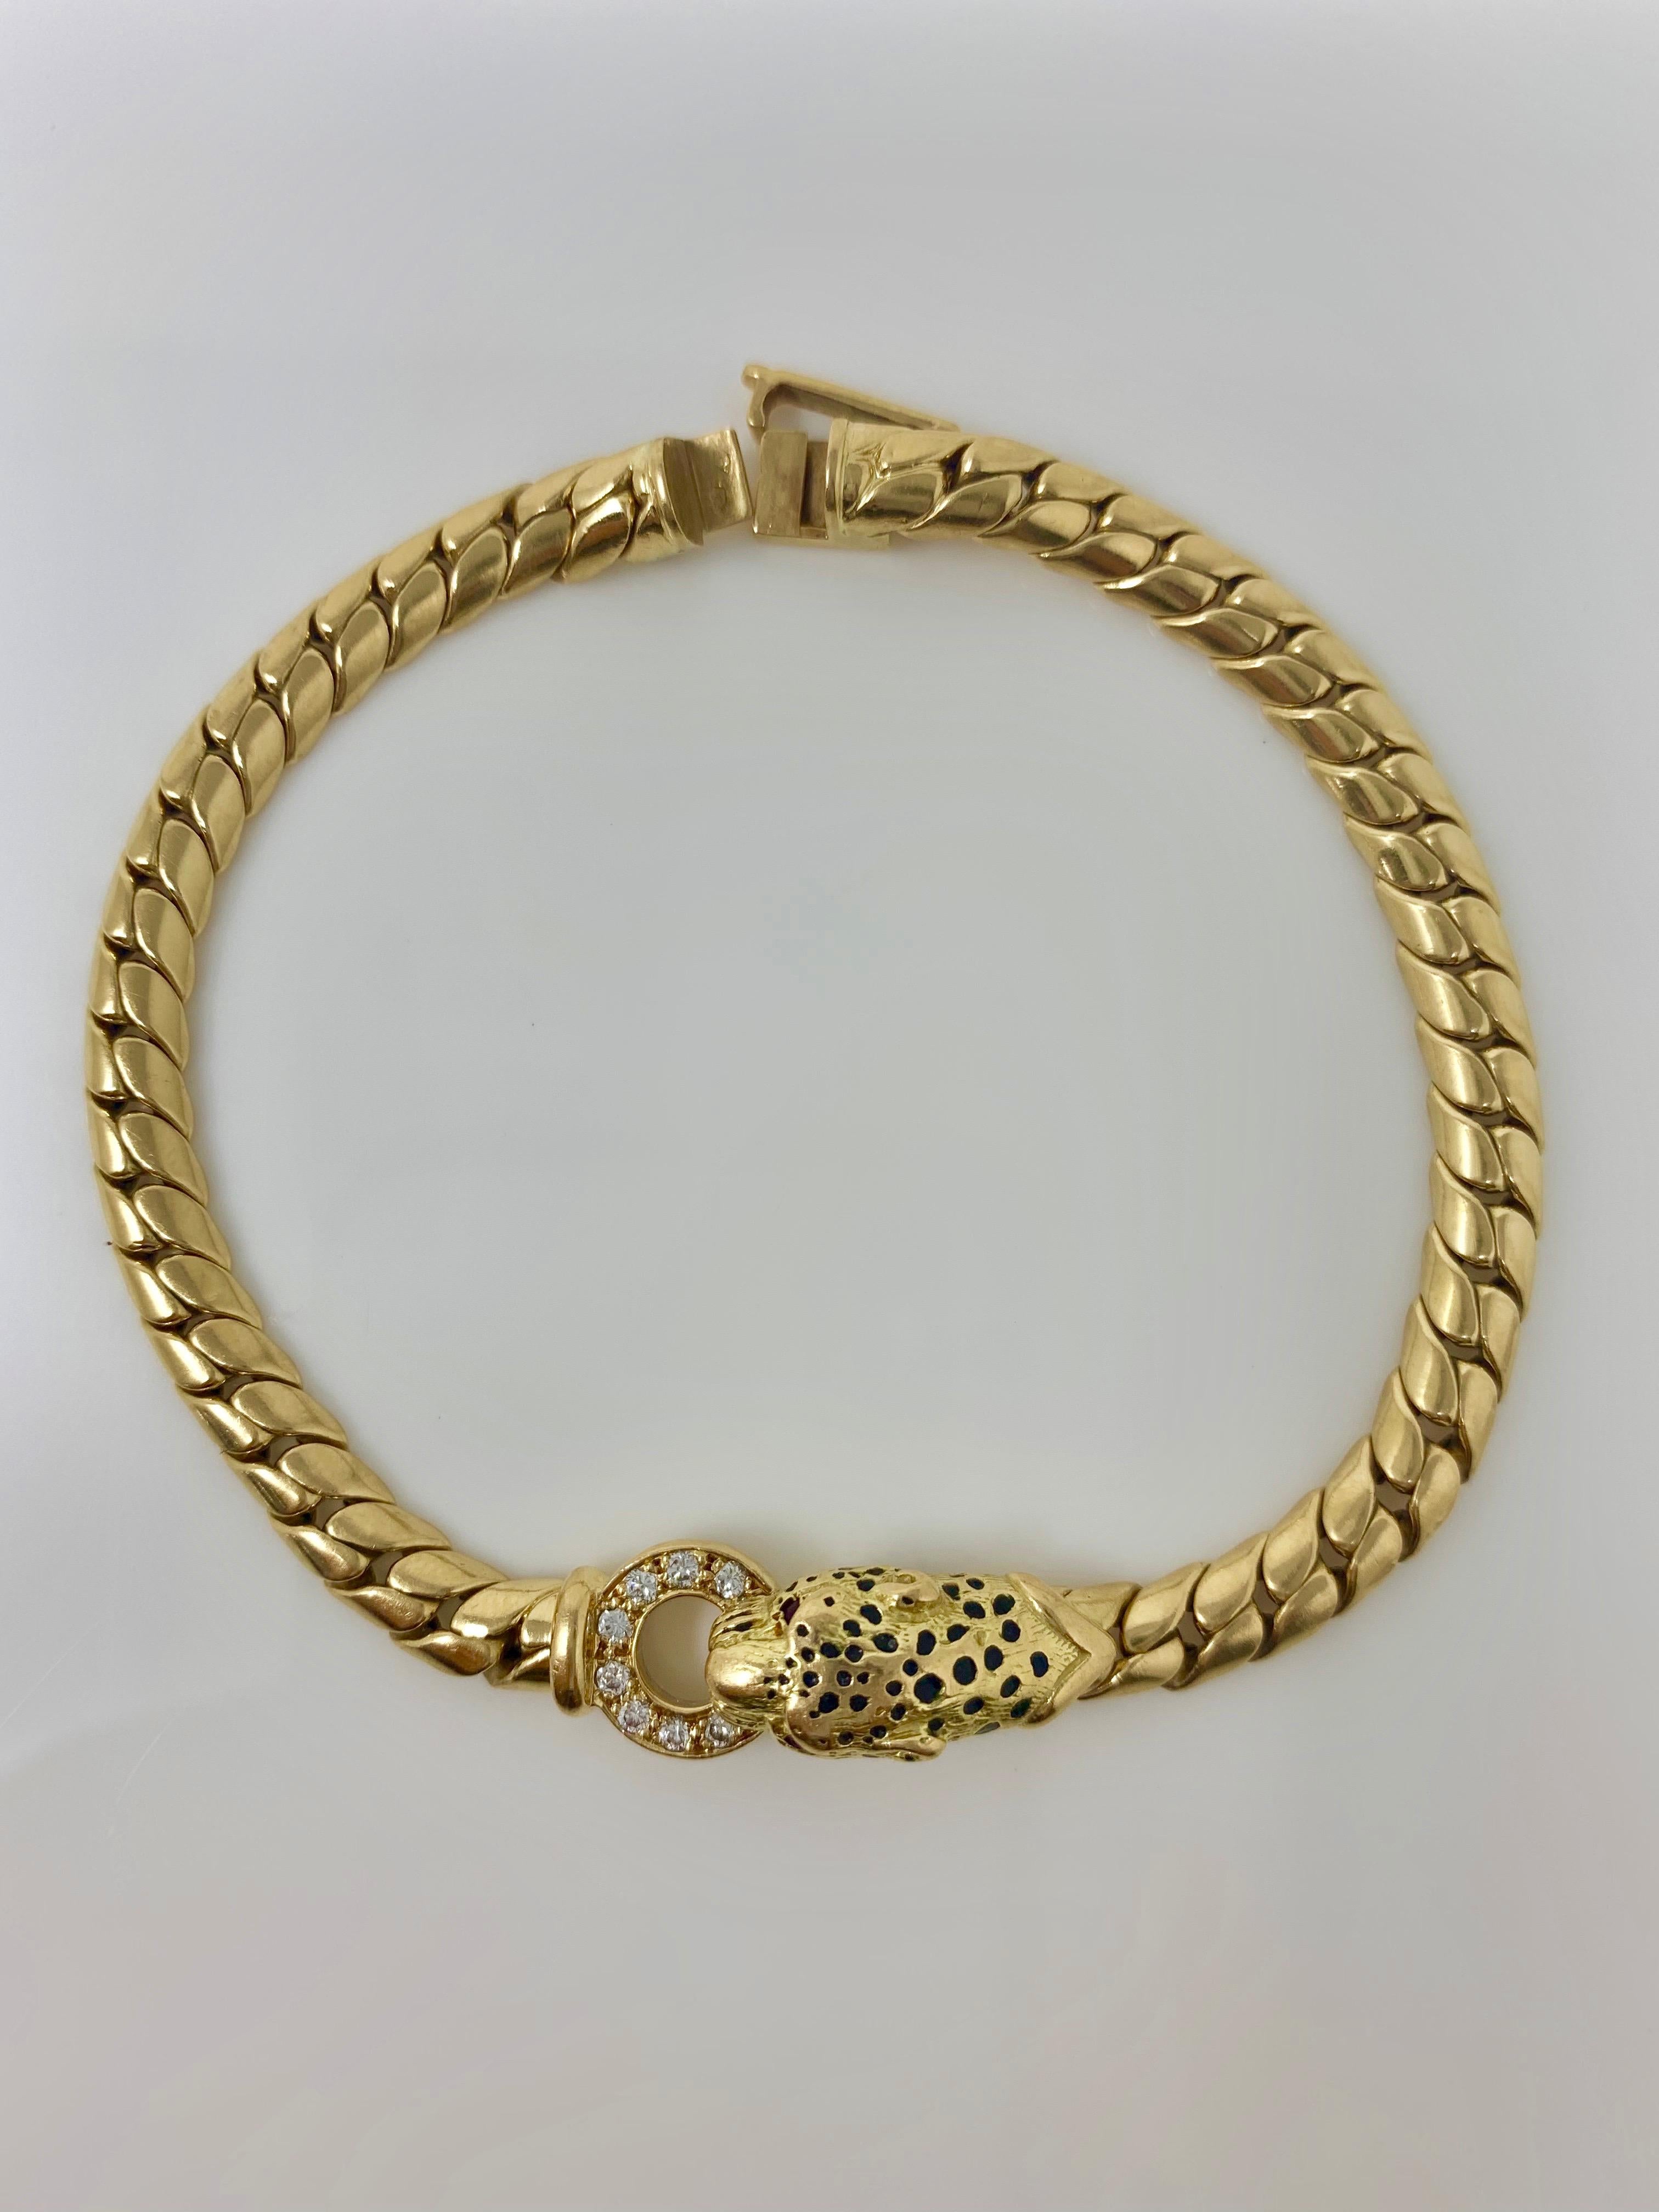 This unique, flexible and one of a kind panther diamond and yellow gold bracelet is beautifully handcrafted in France. 
Diamond weight : 0.20 carat 
Metal : 18K yellow gold
Measurements : 7 1/2 inches 
 